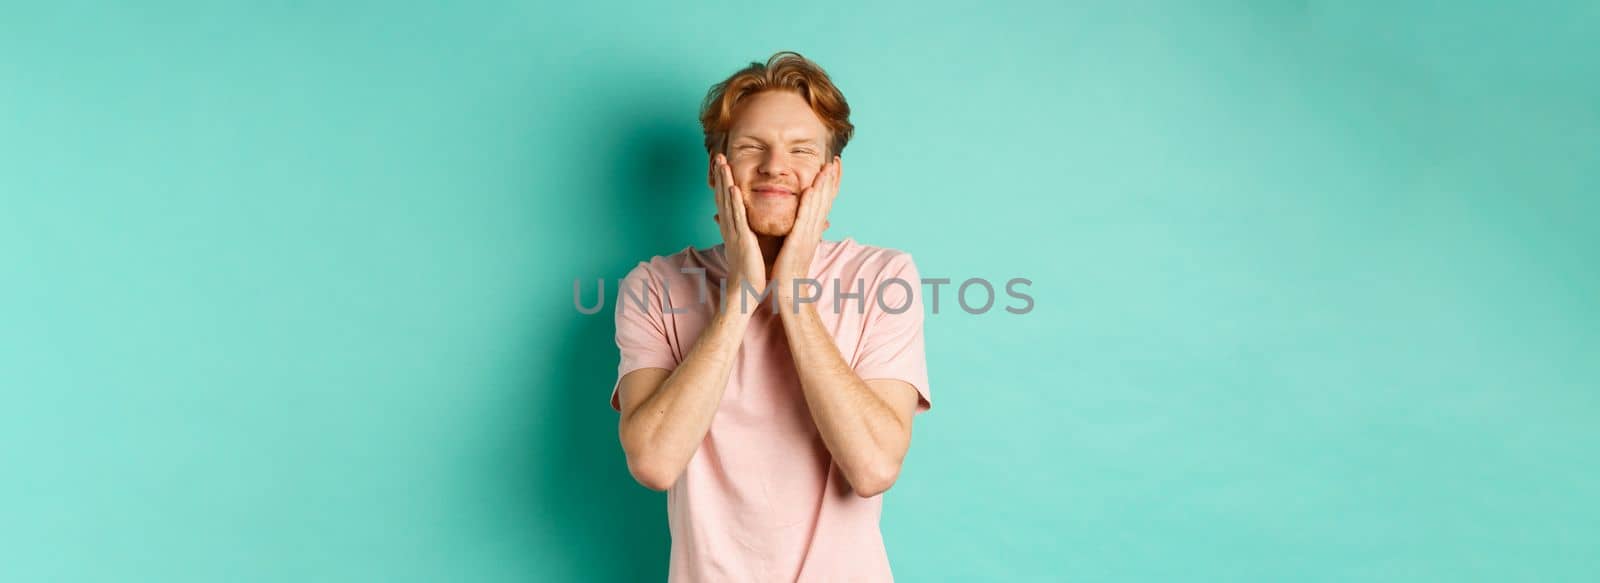 Image of cute and silly young man with red hair, feeling satisfaction while touching his face, smiling happy, standing over turquoise background.